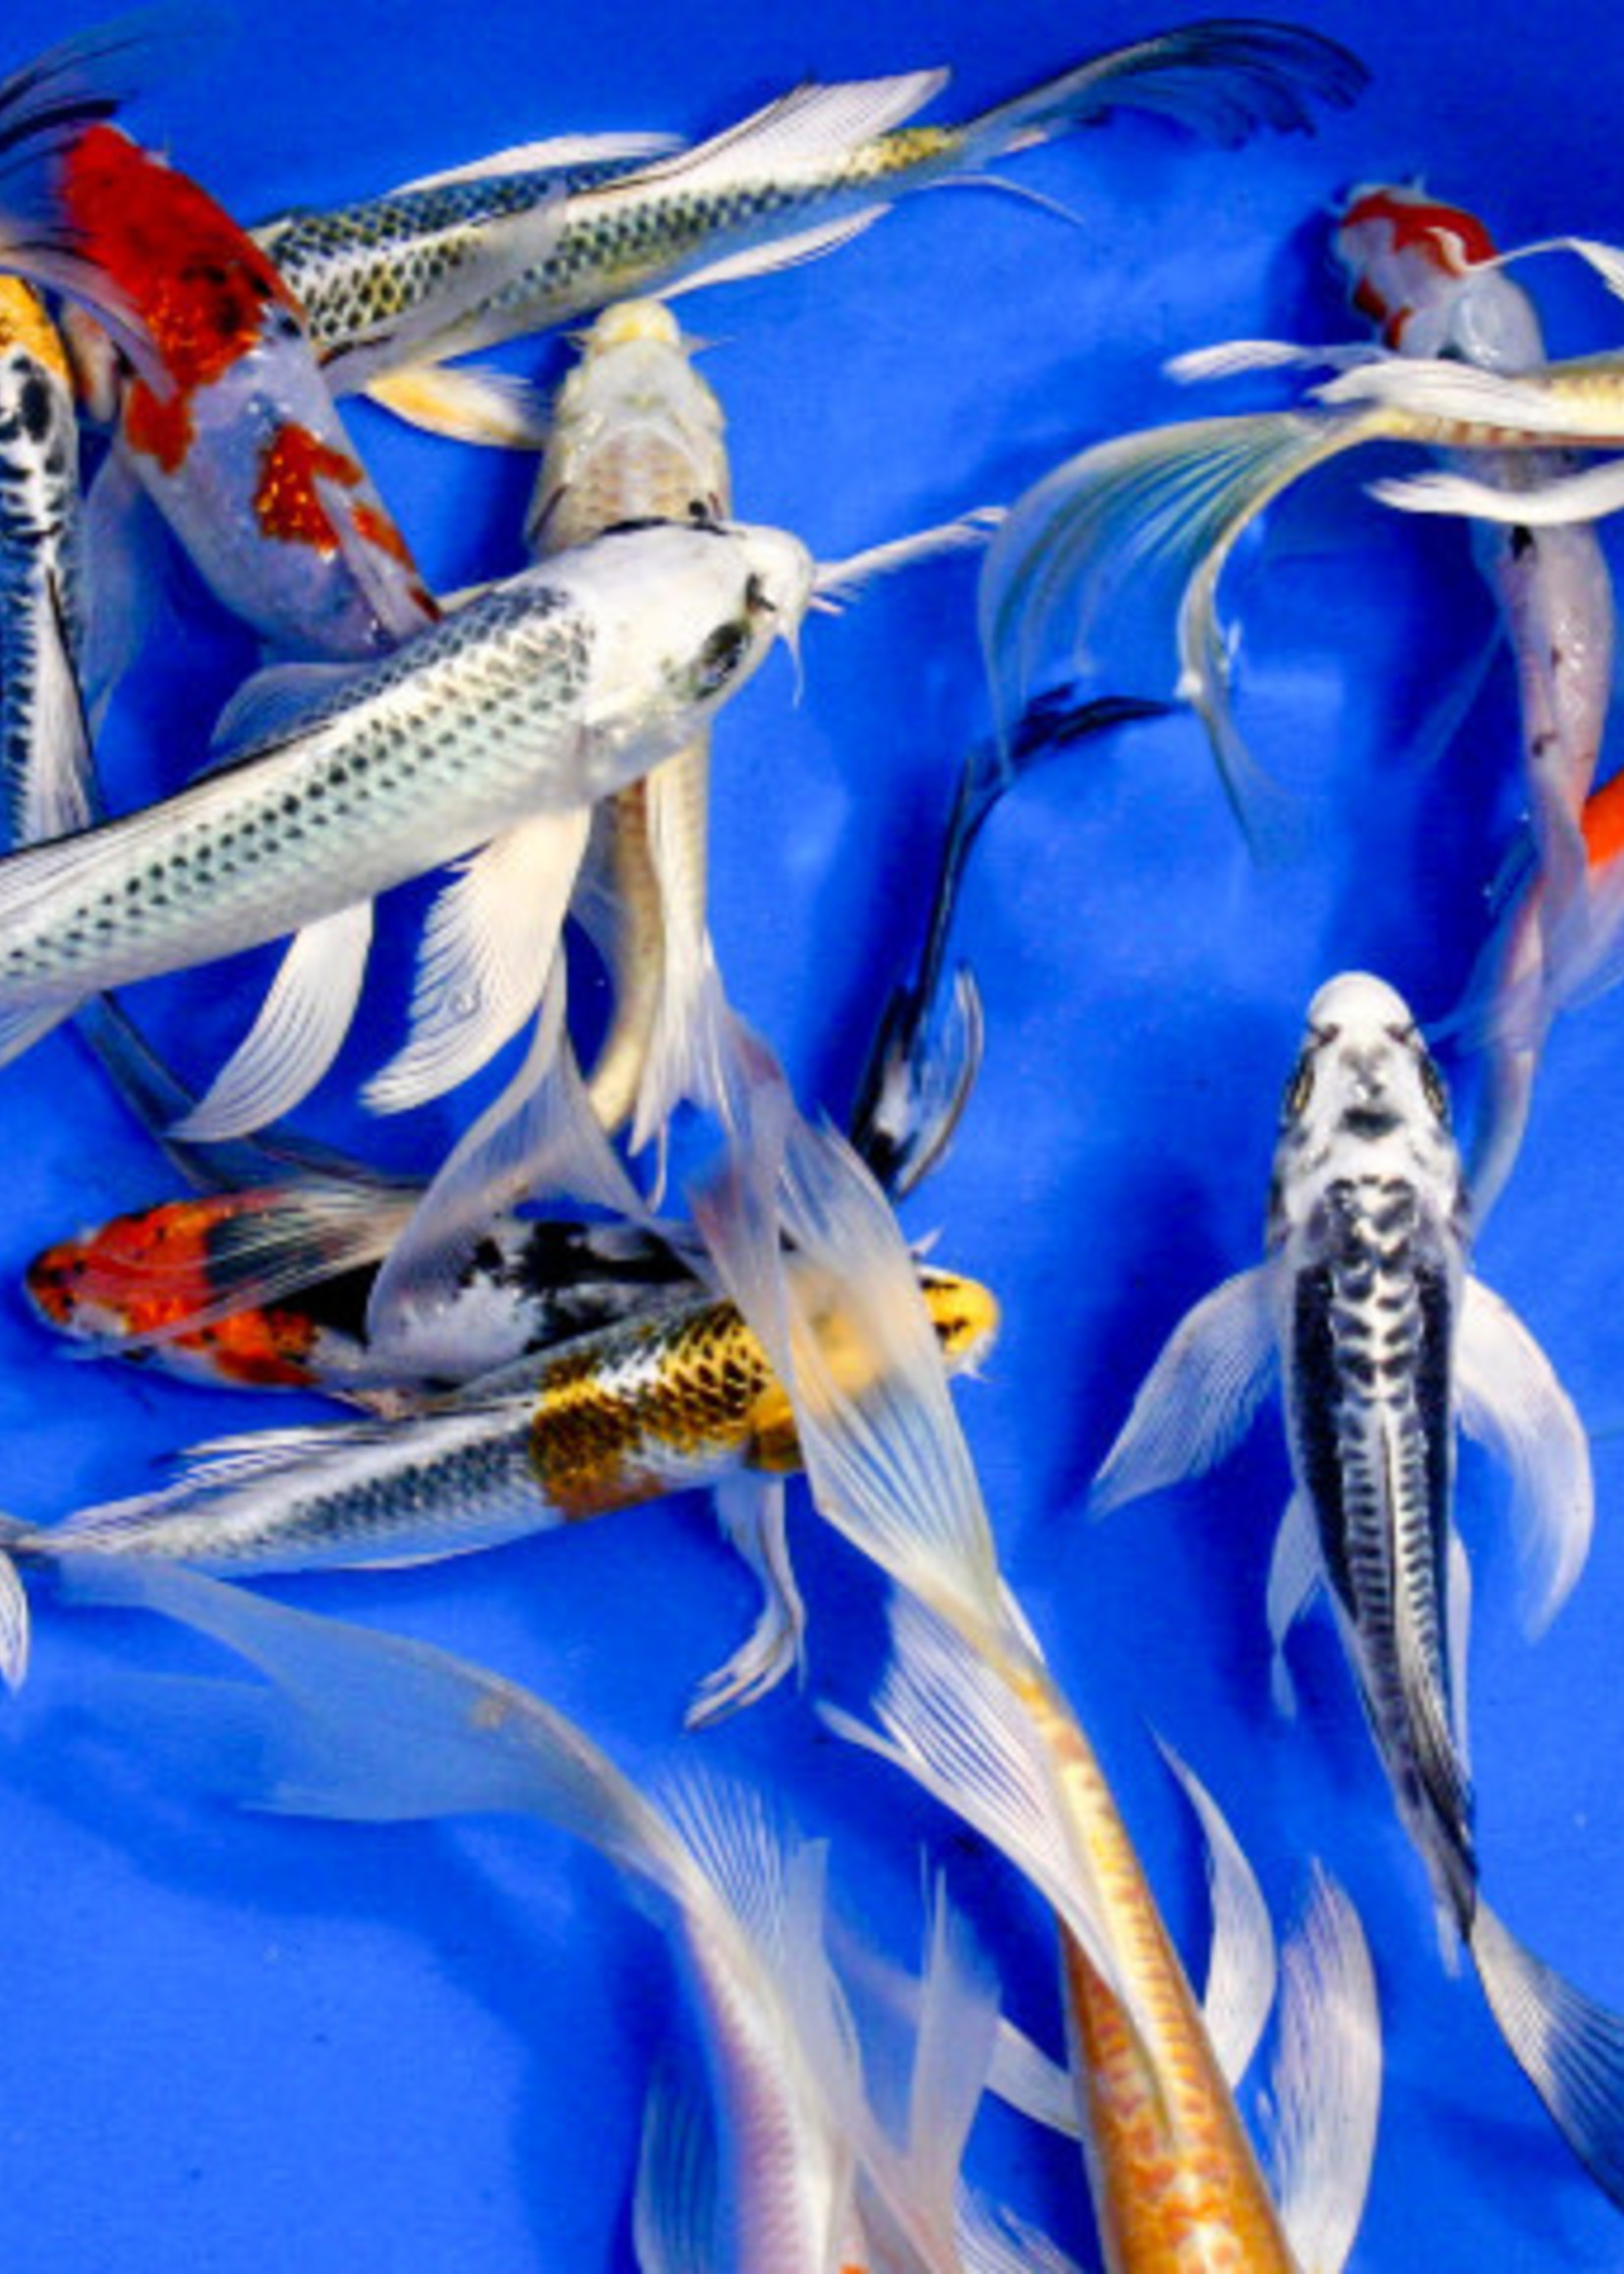 Premium Select Butterfly Koi 4-5" ADD $15 if Blue (wishing well pond)